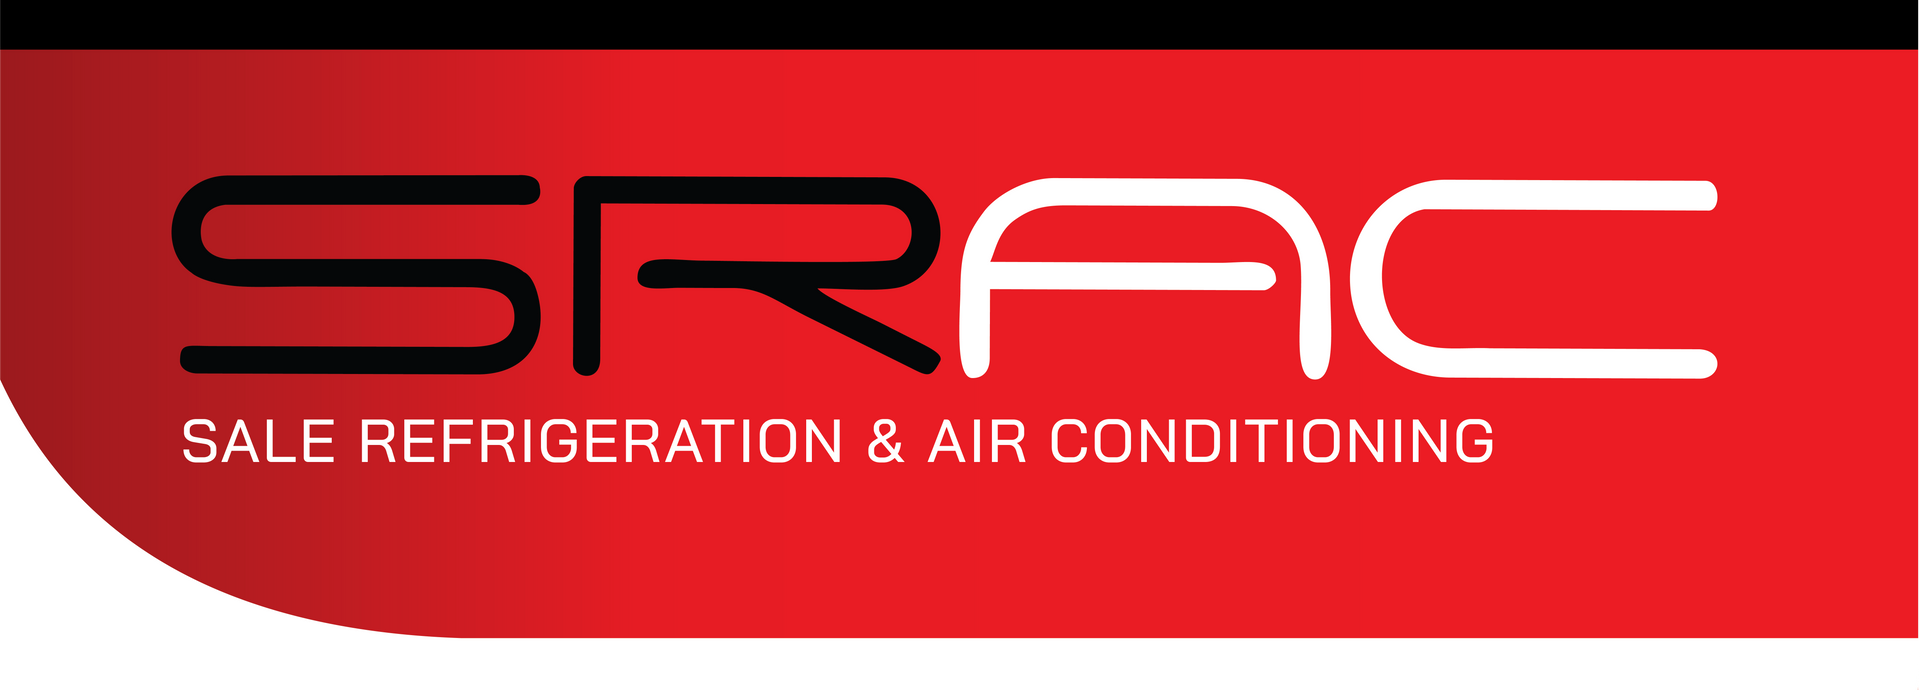 Sale Refrigeration & Air Conditioning